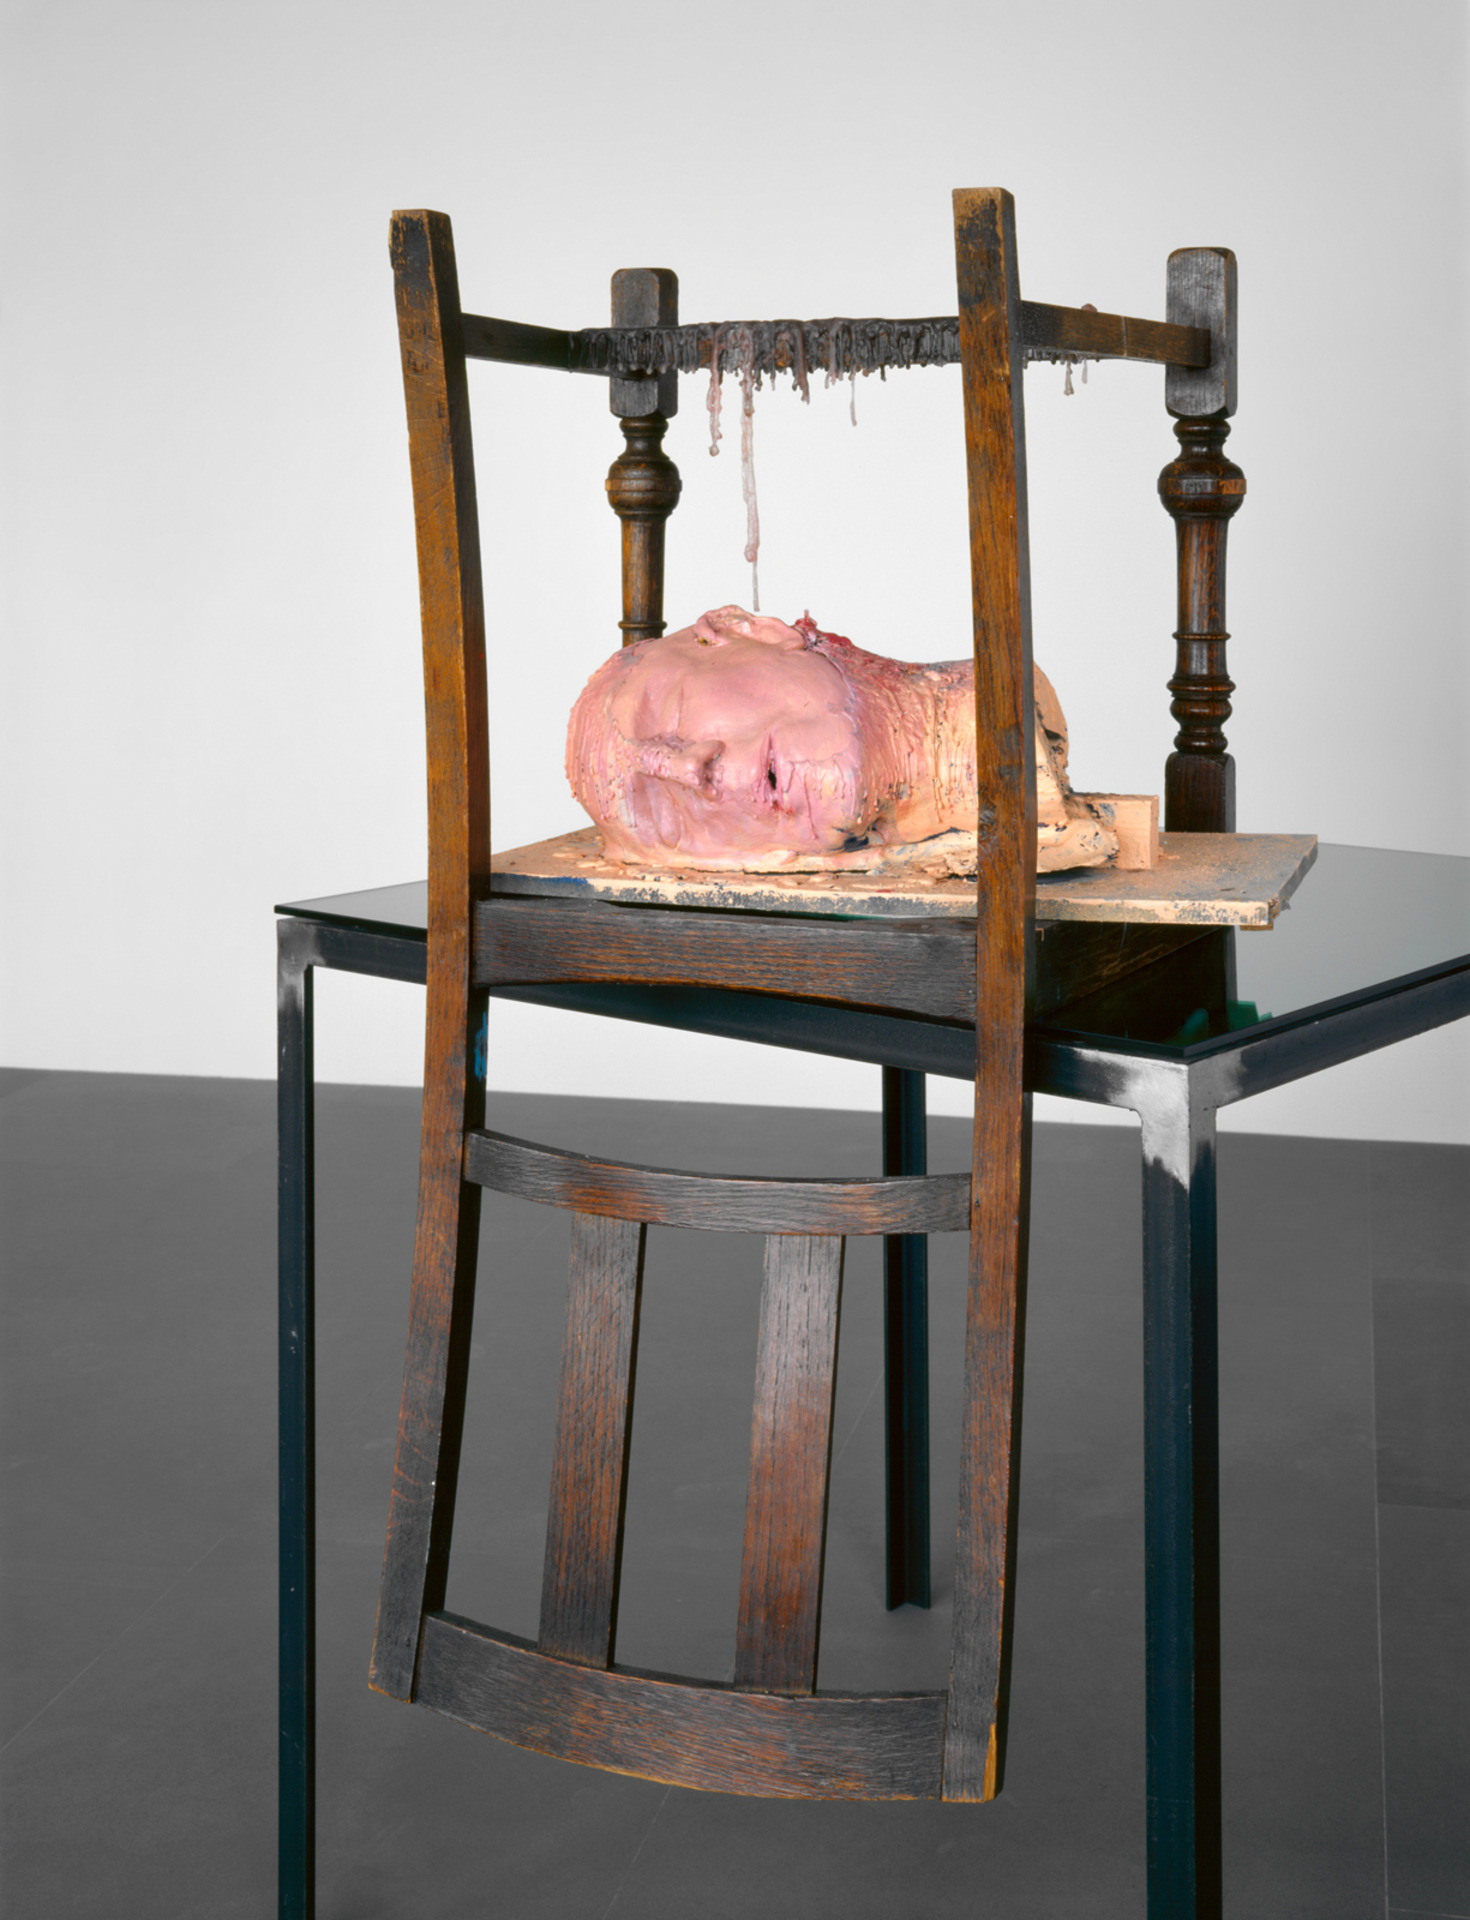 Untitled (Chair)